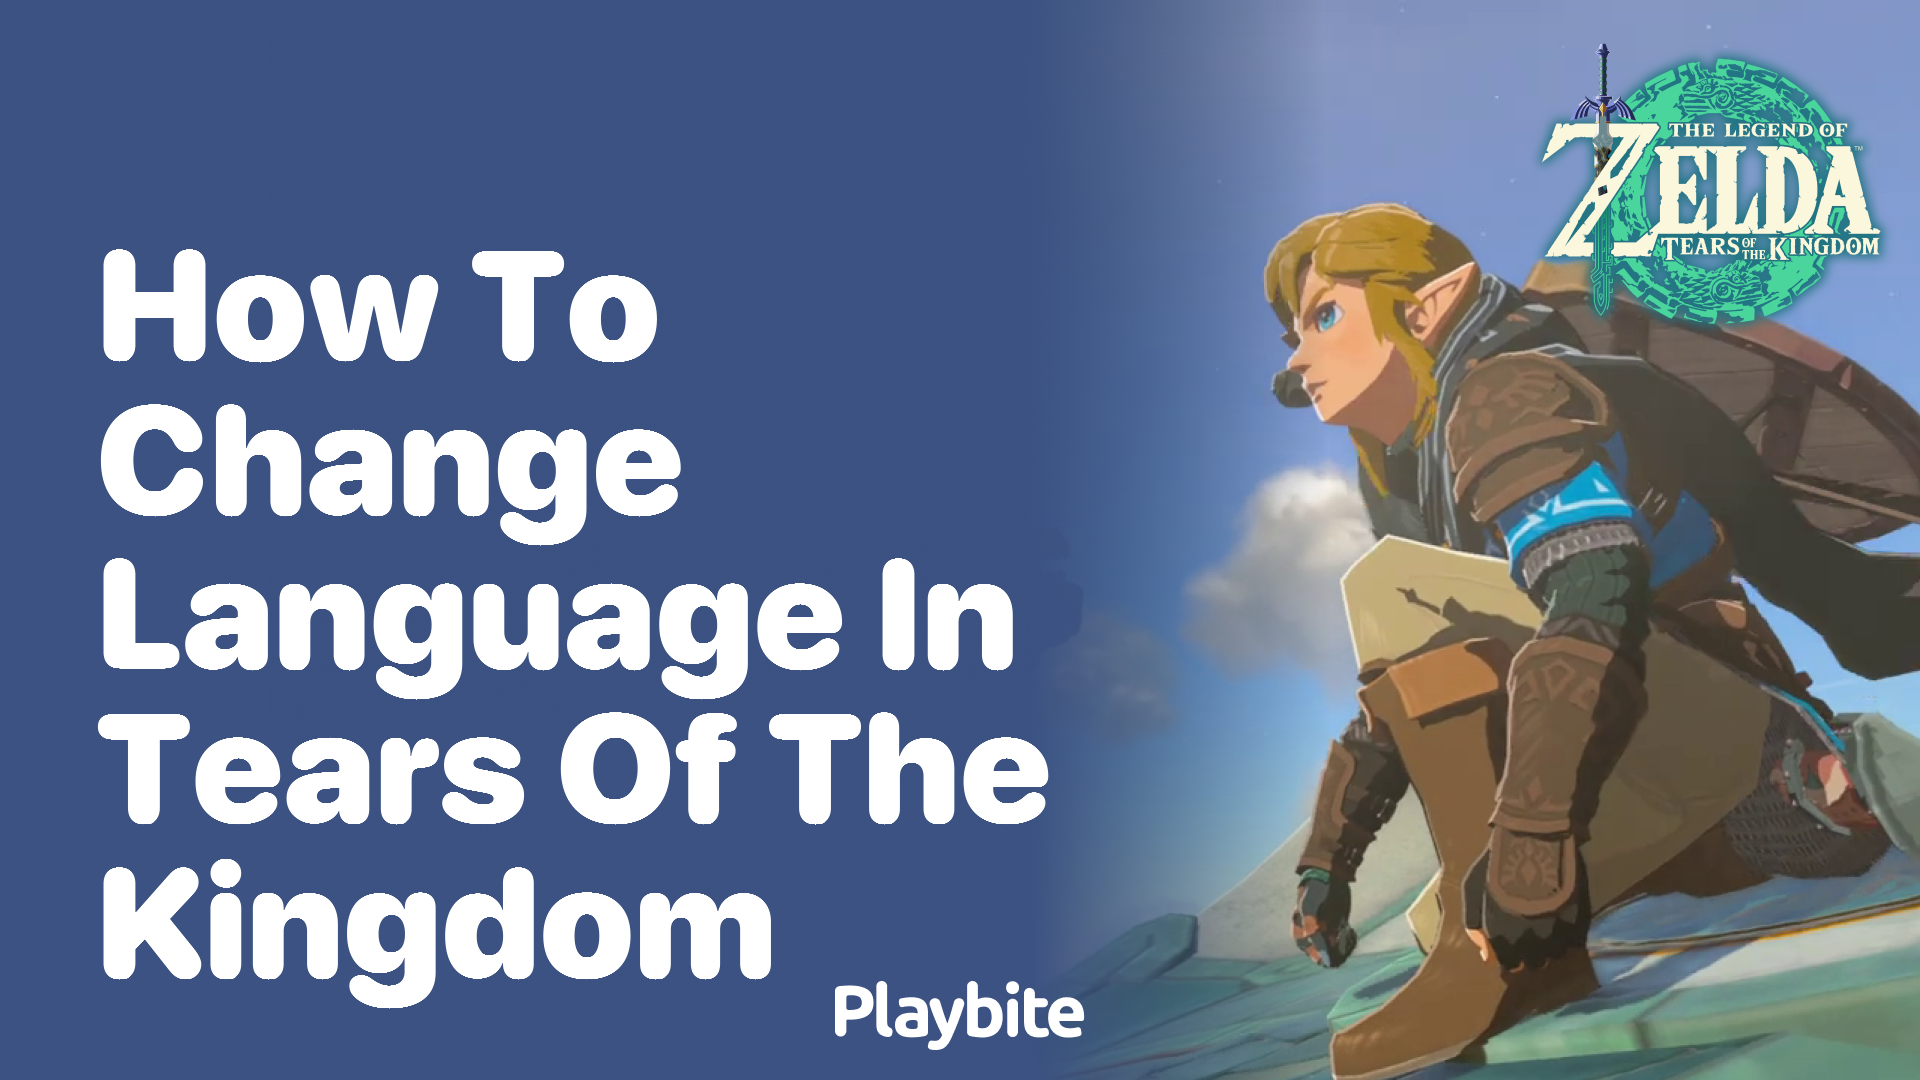 How to Change Language in Tears of the Kingdom